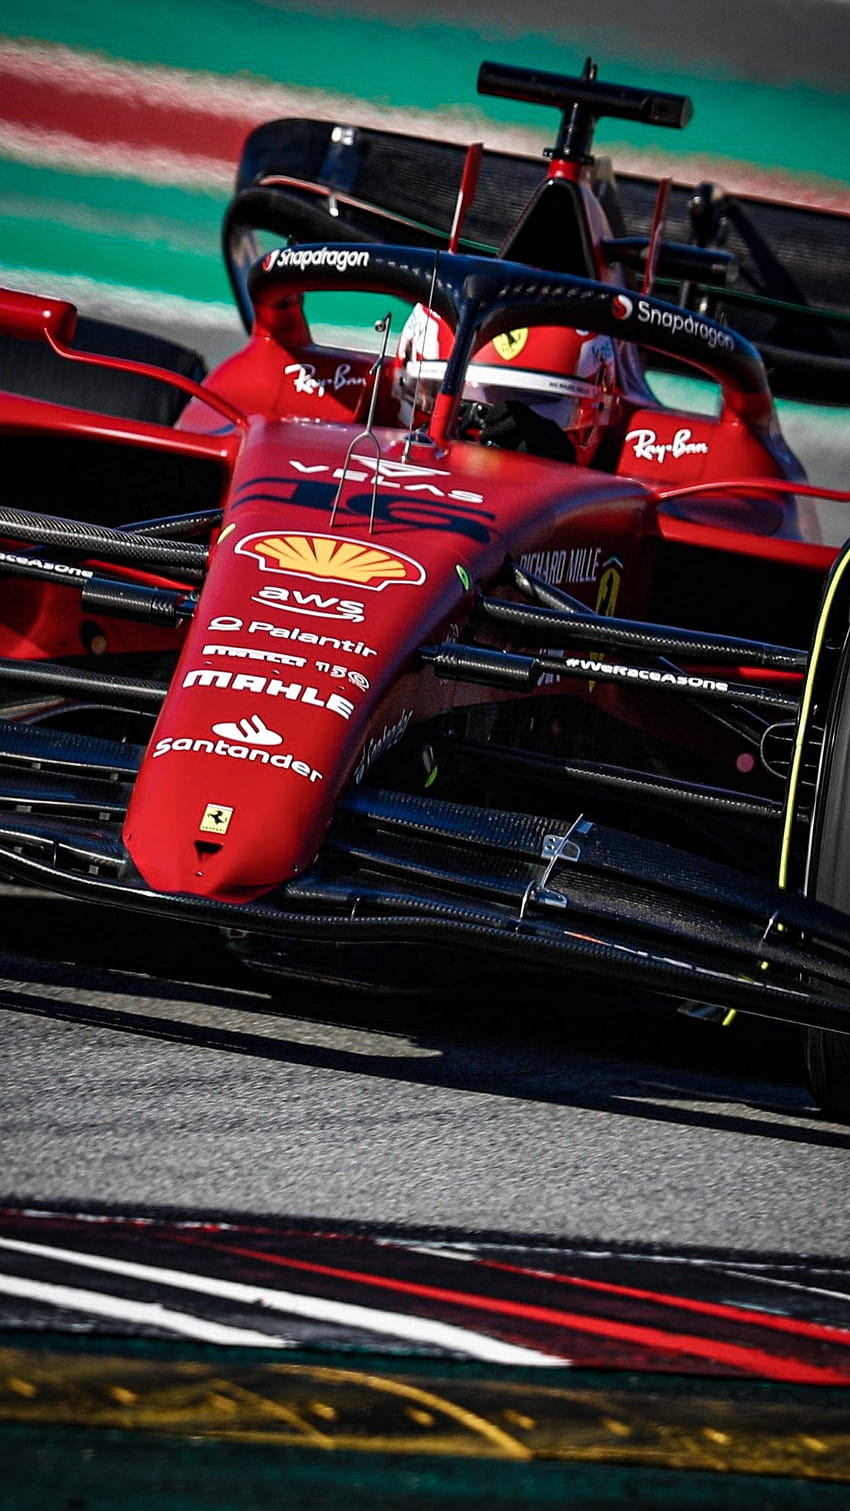 Ferrari to stick with update plan no concept change for SF23